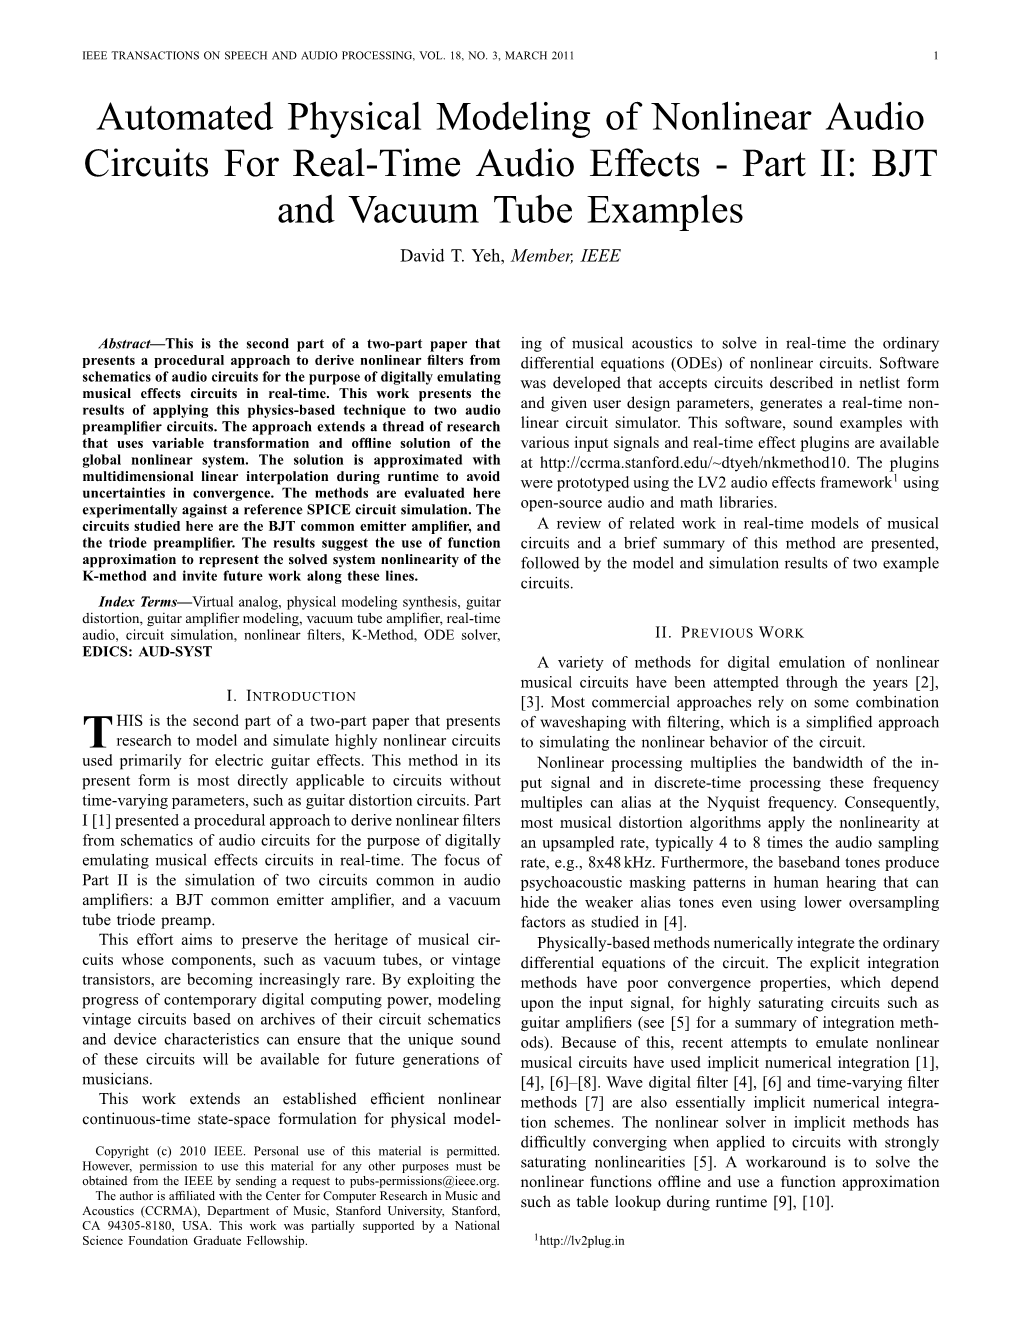 Automated Physical Modeling of Nonlinear Audio Circuits for Real-Time Audio Effects - Part II: BJT and Vacuum Tube Examples David T